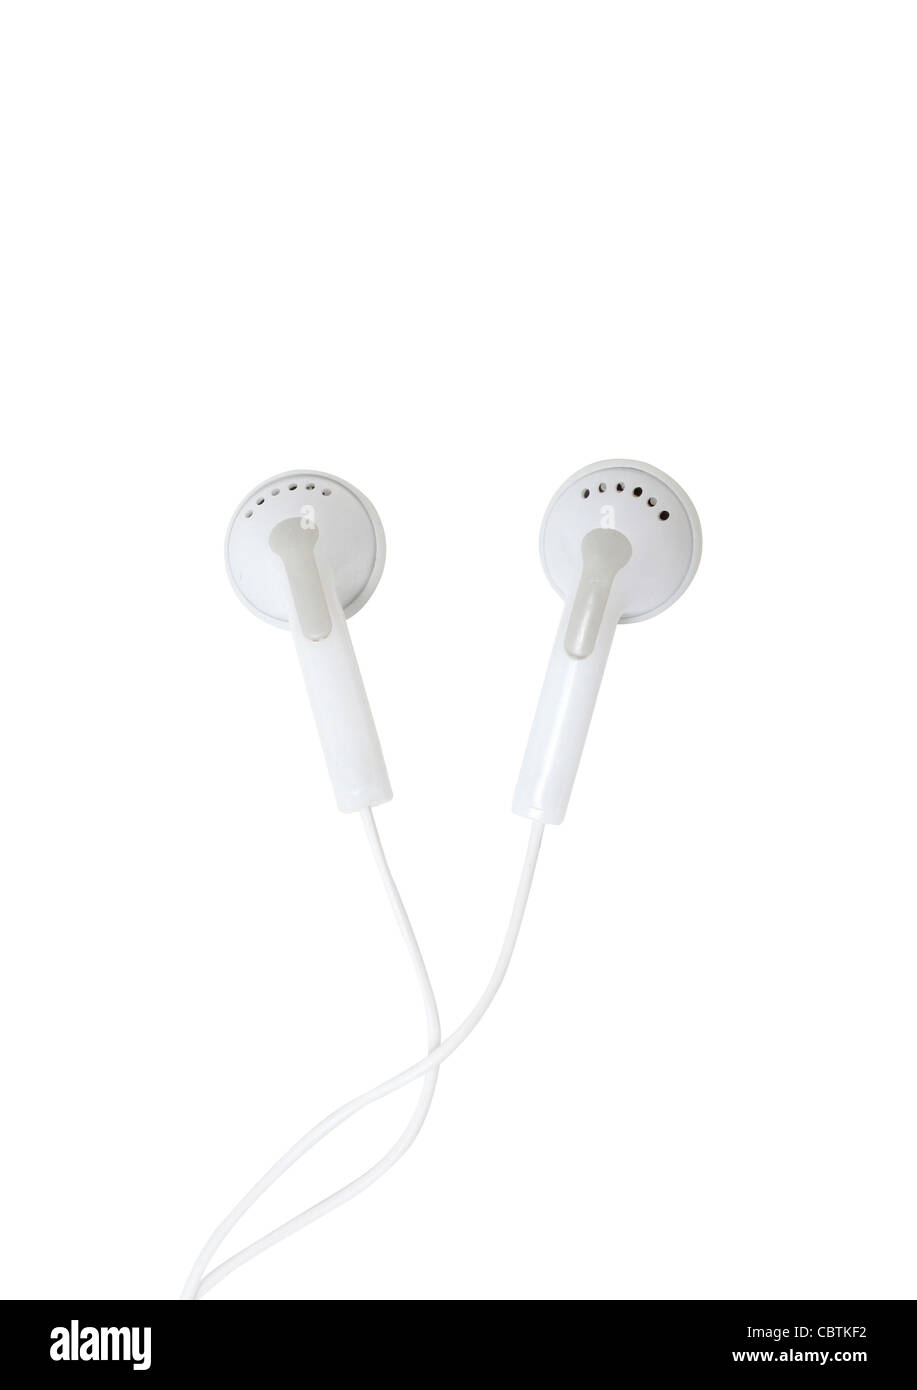 Ear buds isolated on white Stock Photo